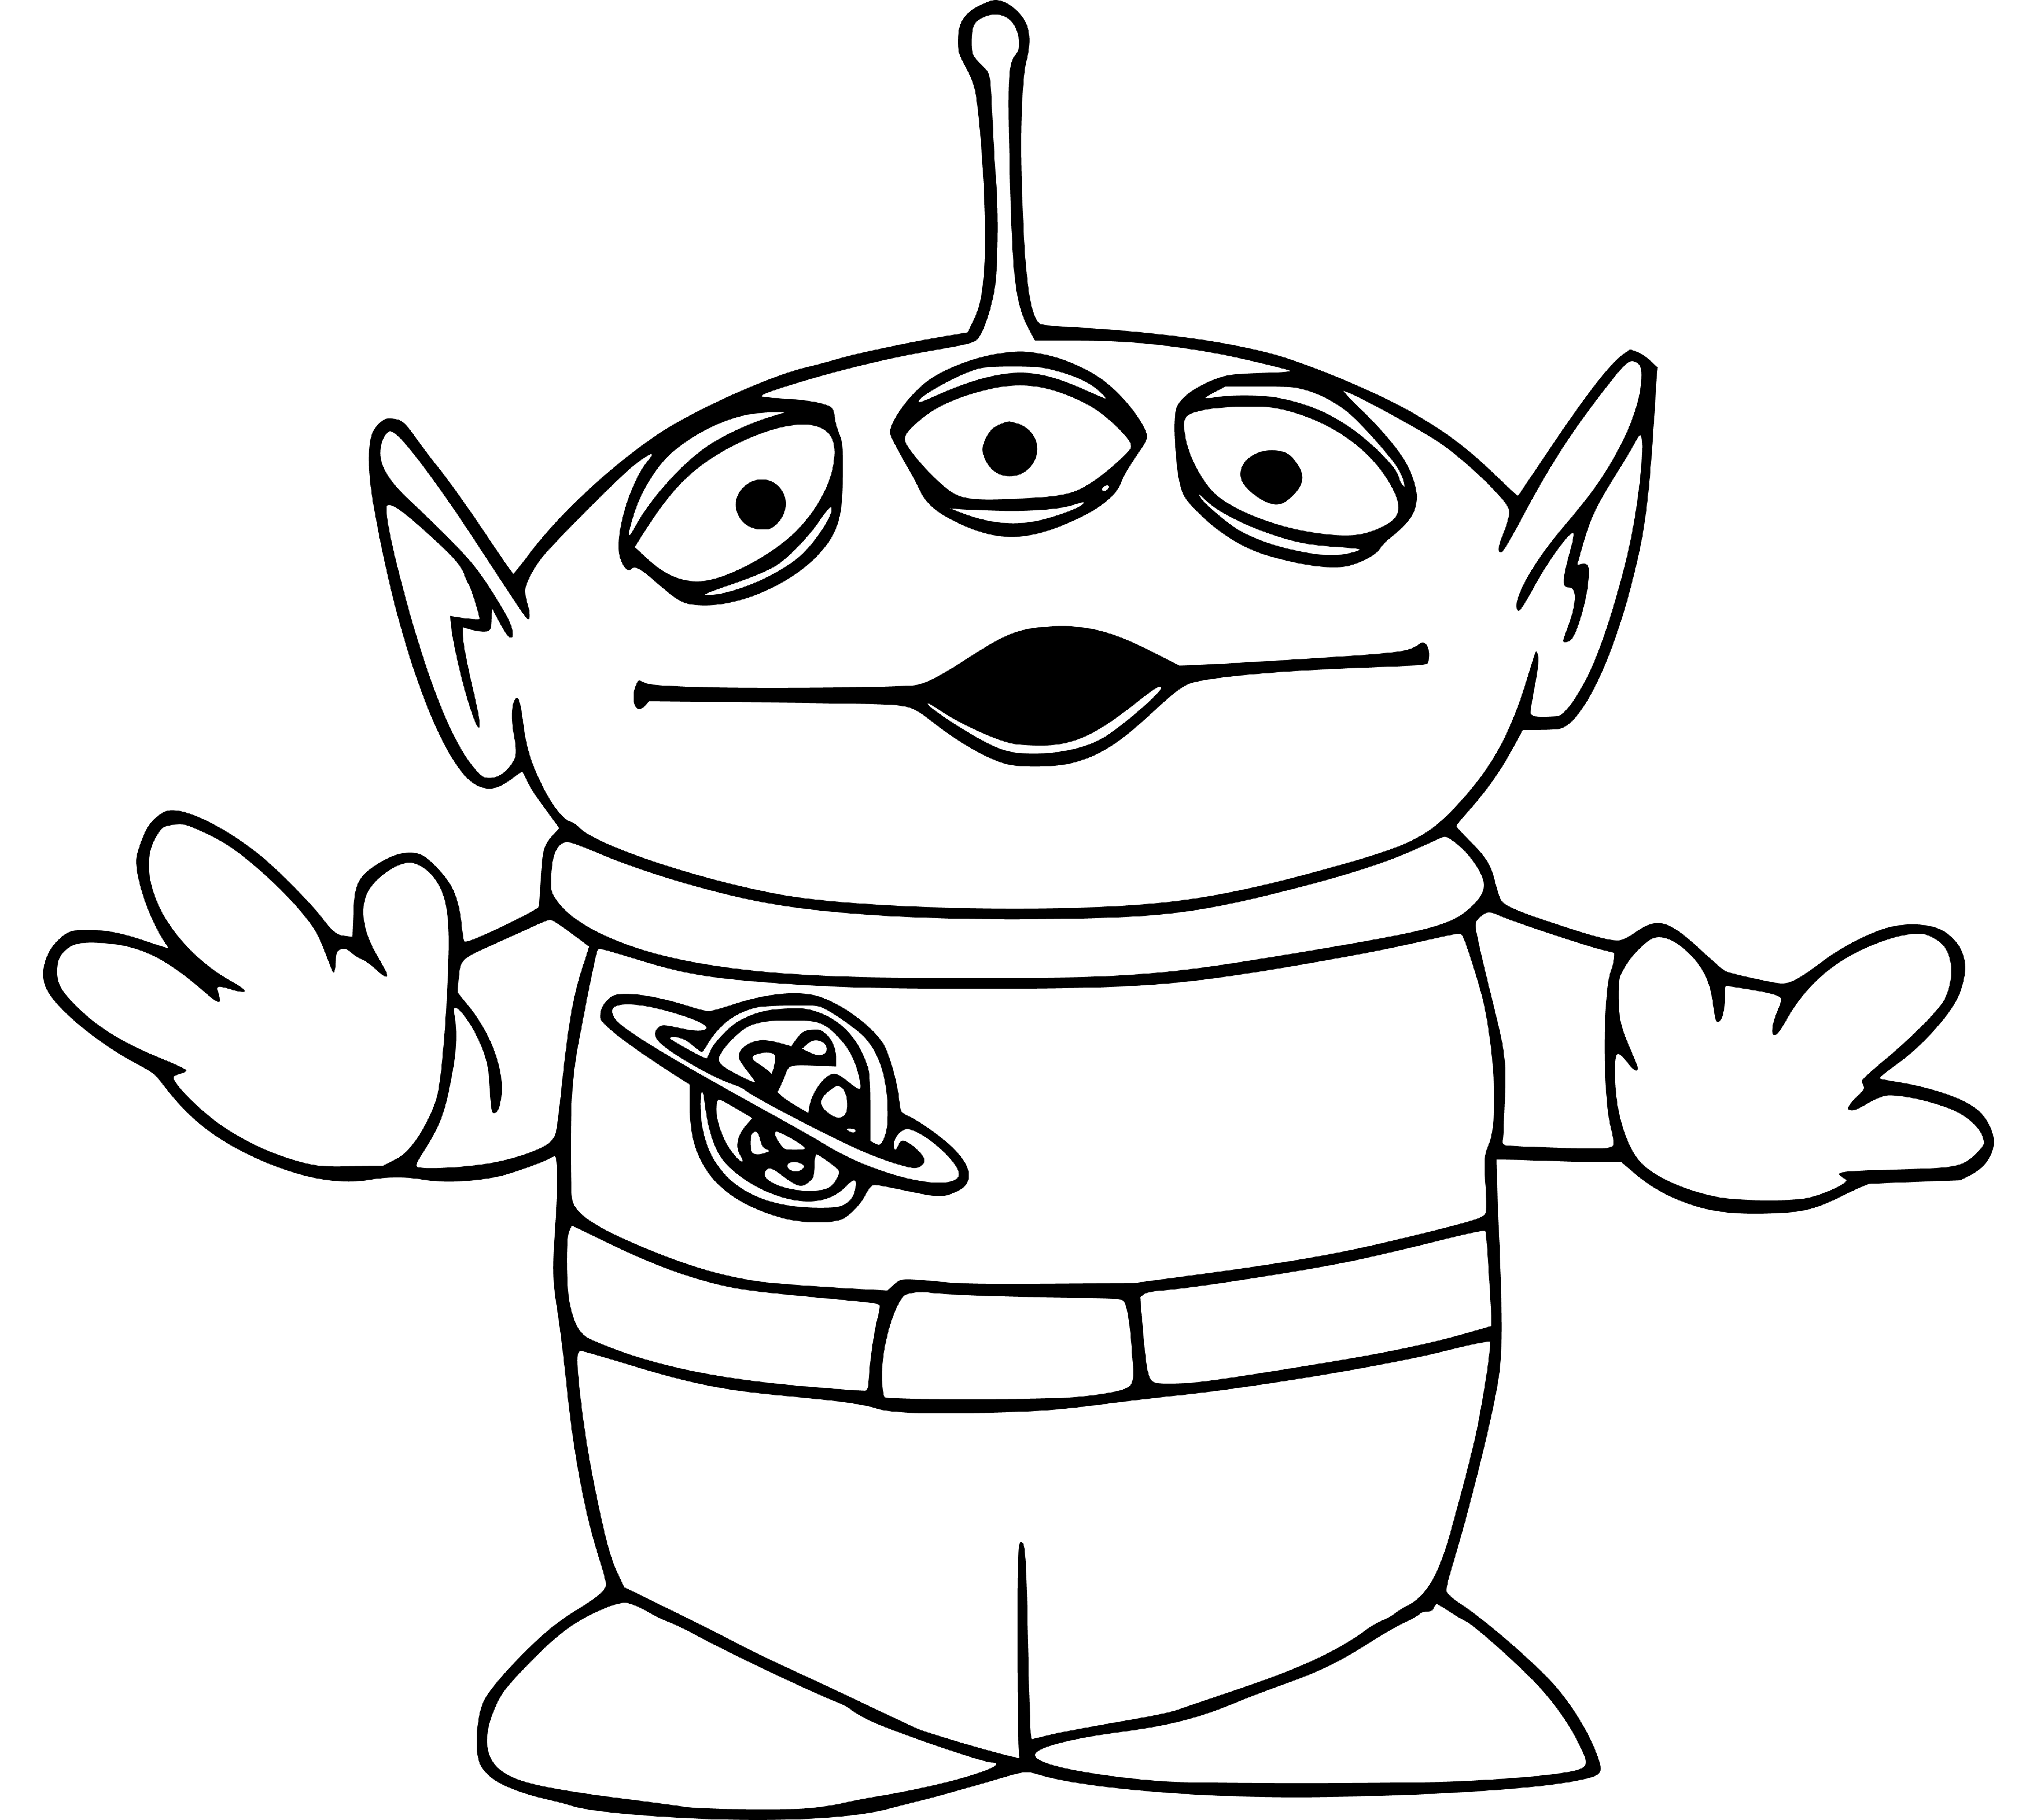 Toy Story Aliens Simple Coloring Page for Kids Printable - SheetalColor.com